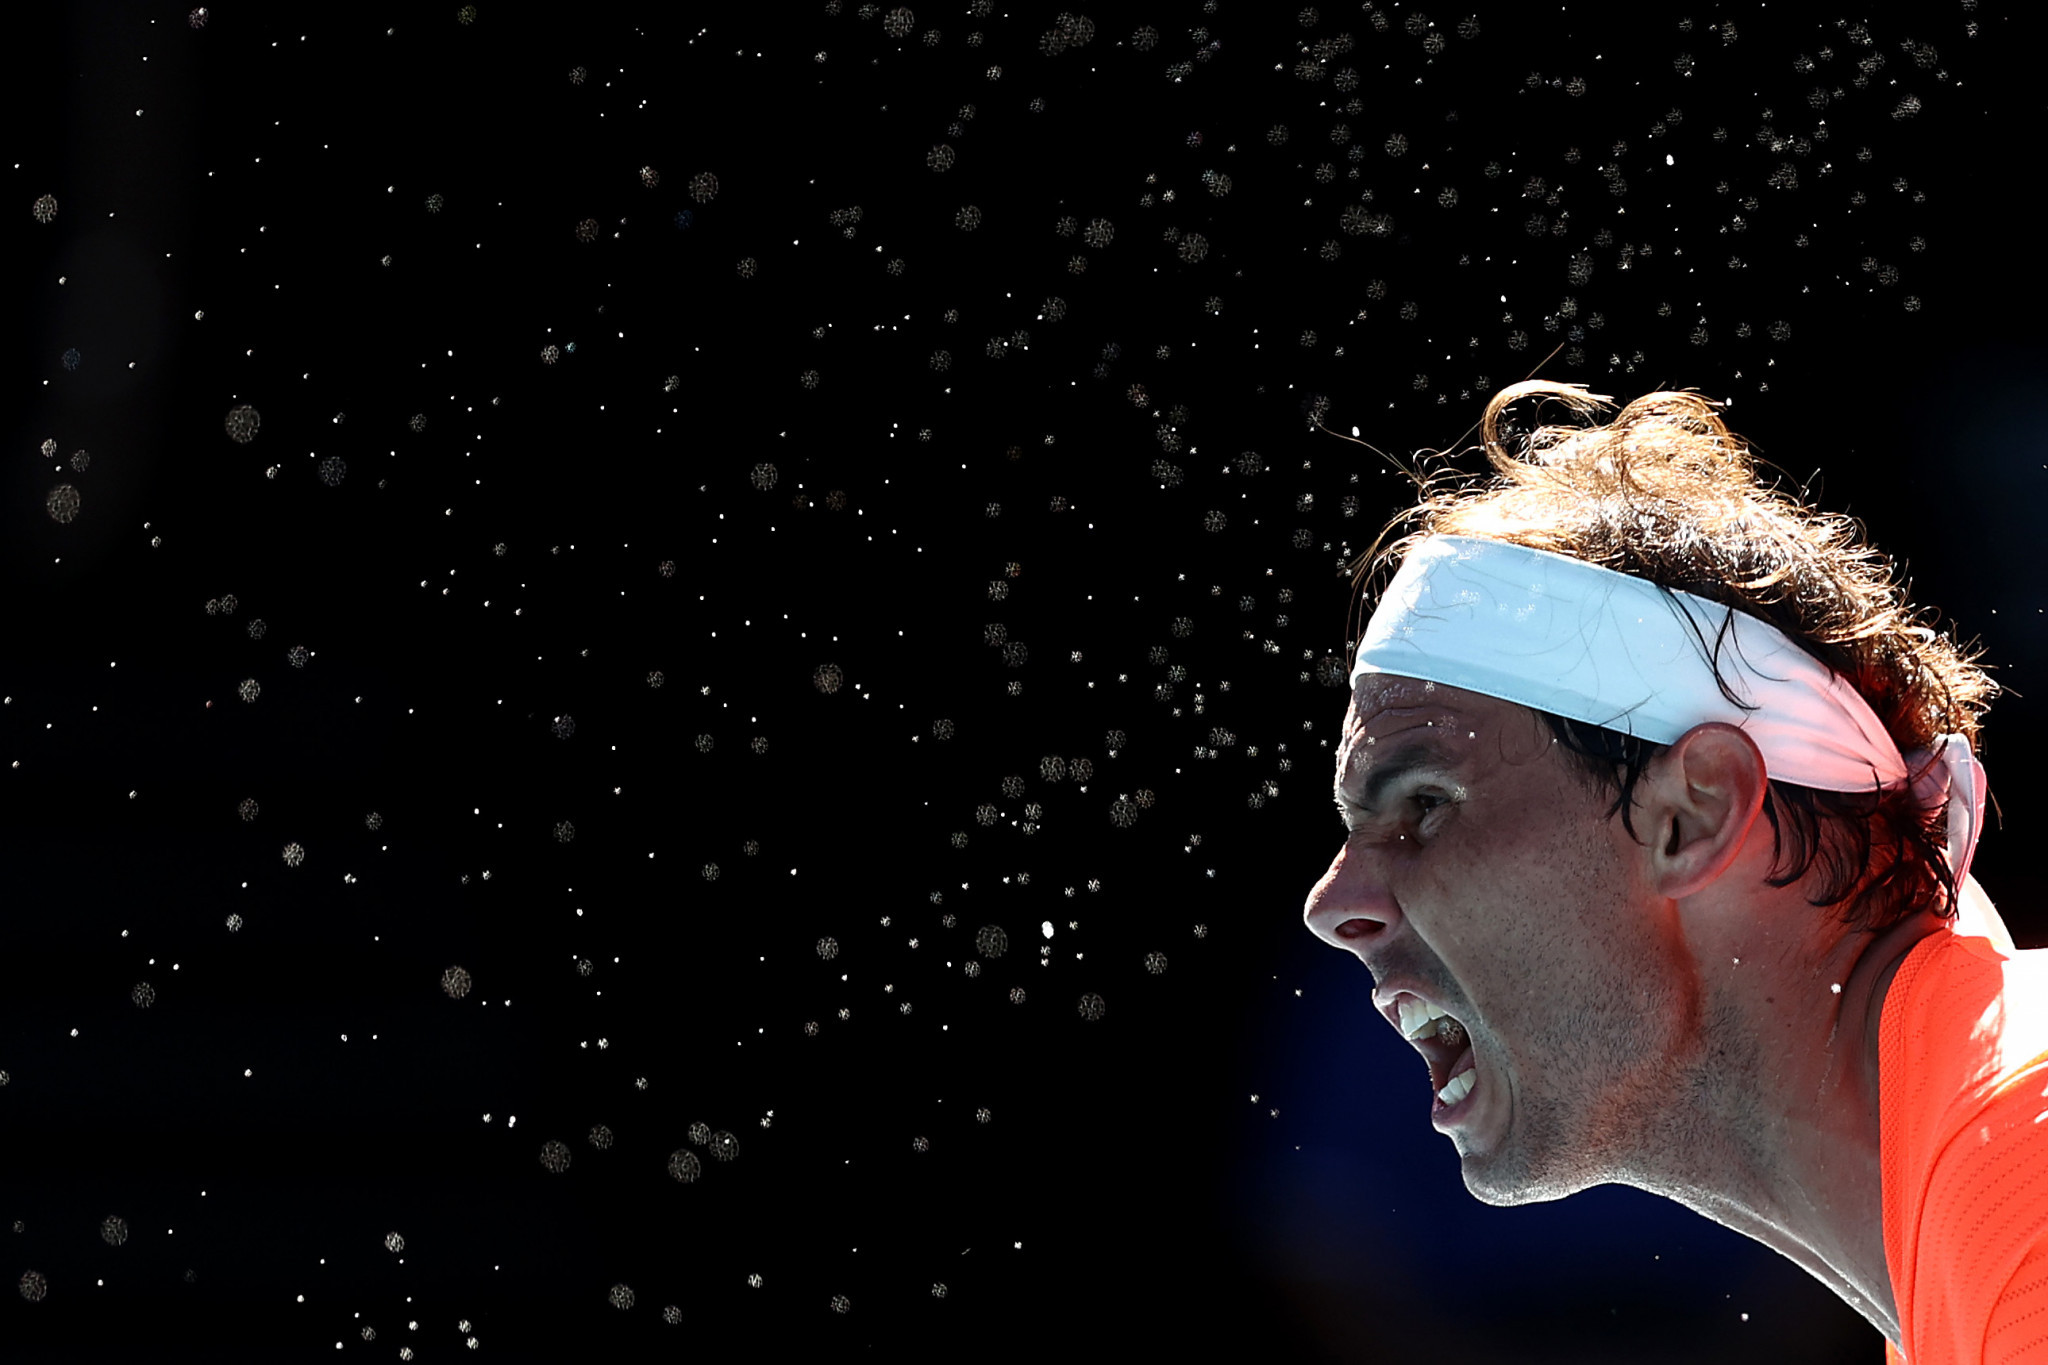 Rafael Nadal dropped eight games on his way to a convincing straight sets win on the Rod Laver Arena ©Getty Images